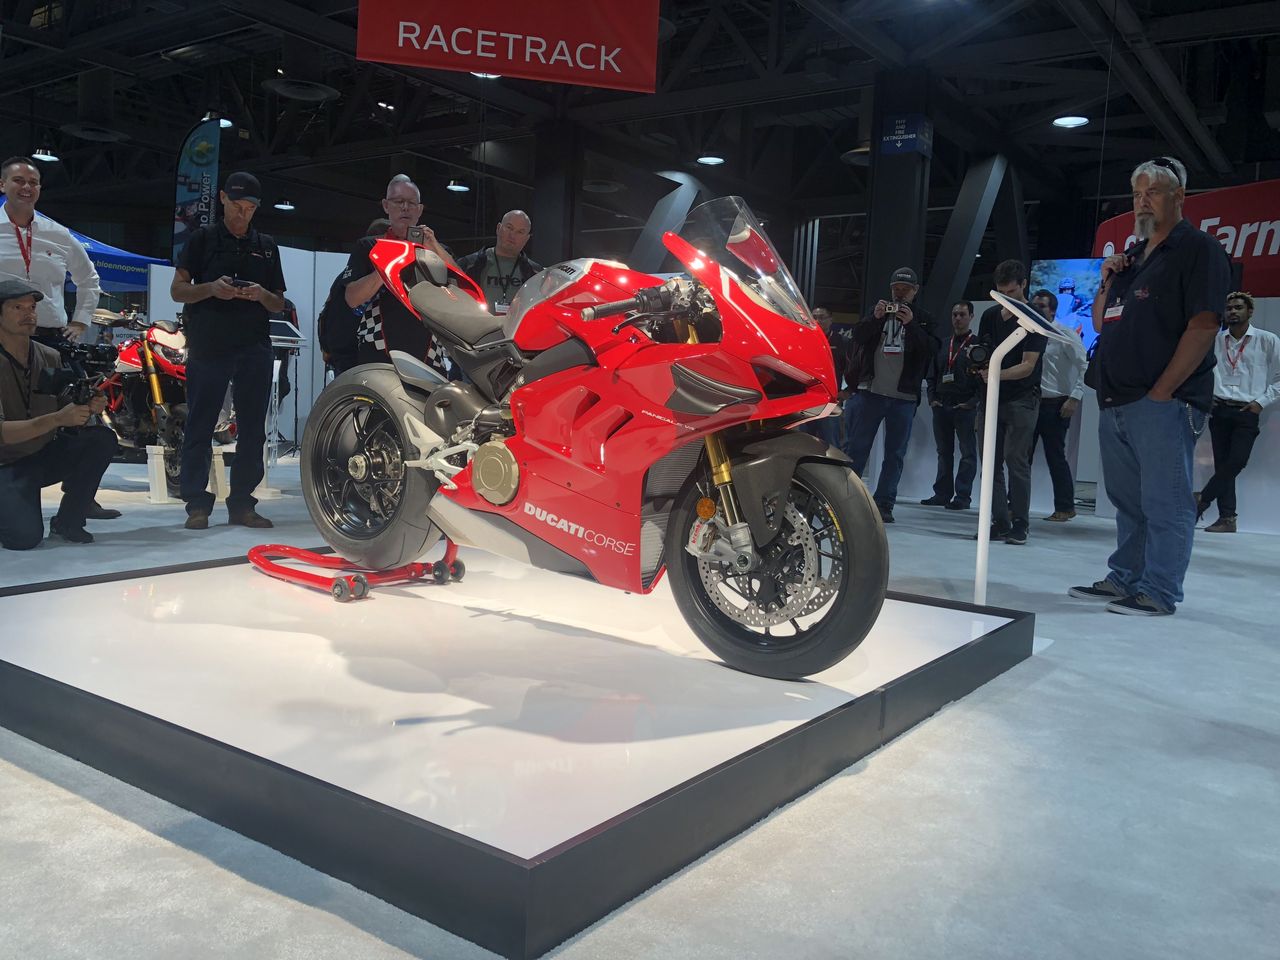 The mighty 2019 Ducati Panigale V4 R